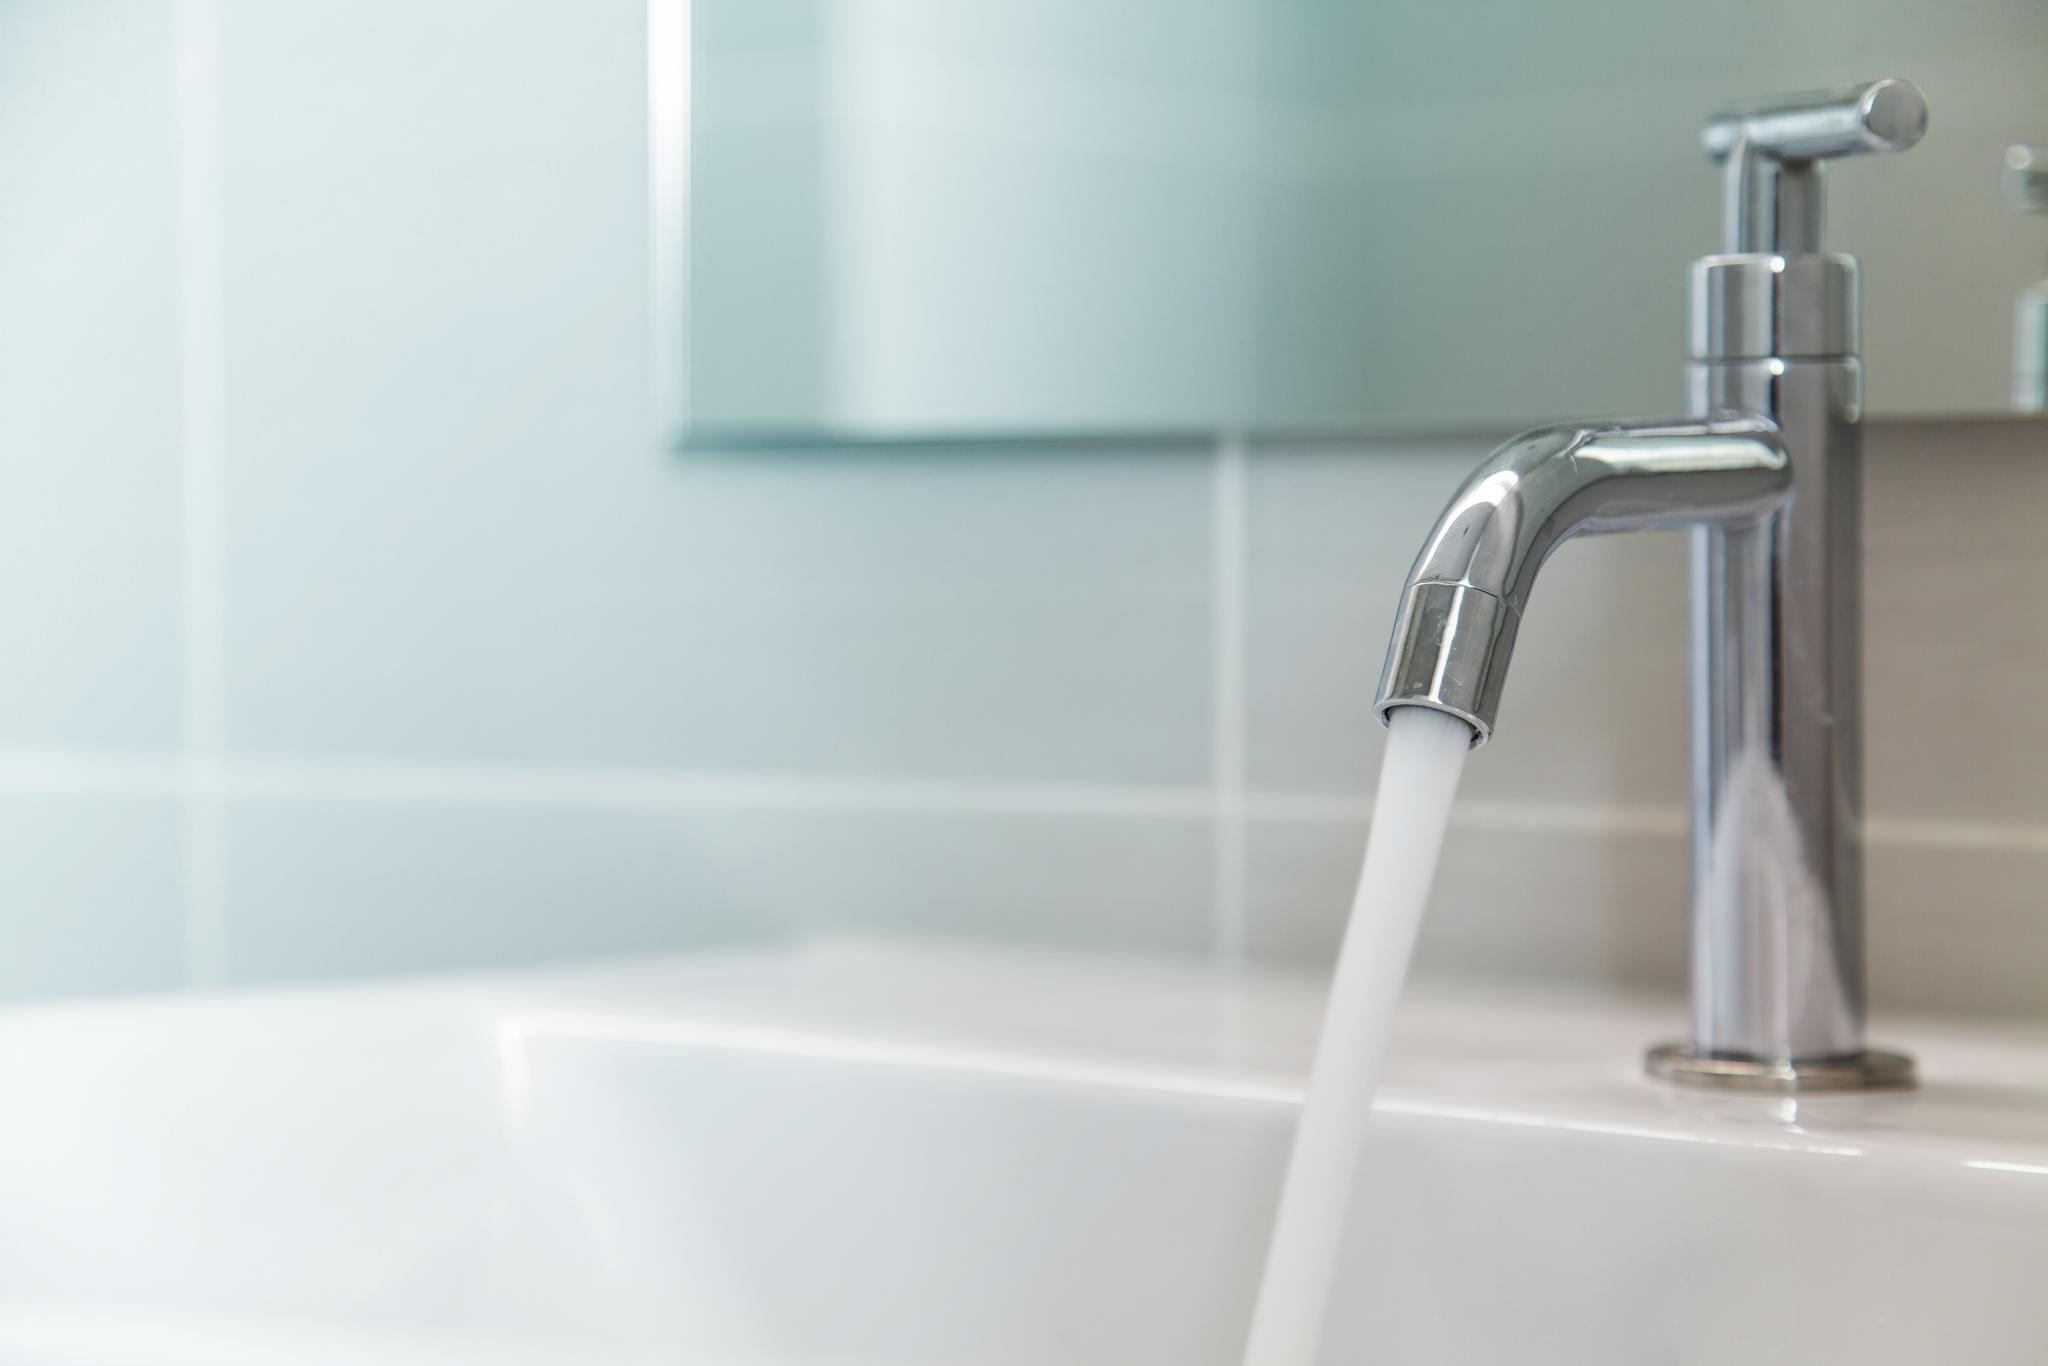 Reduce the effects of hard water on your boiler